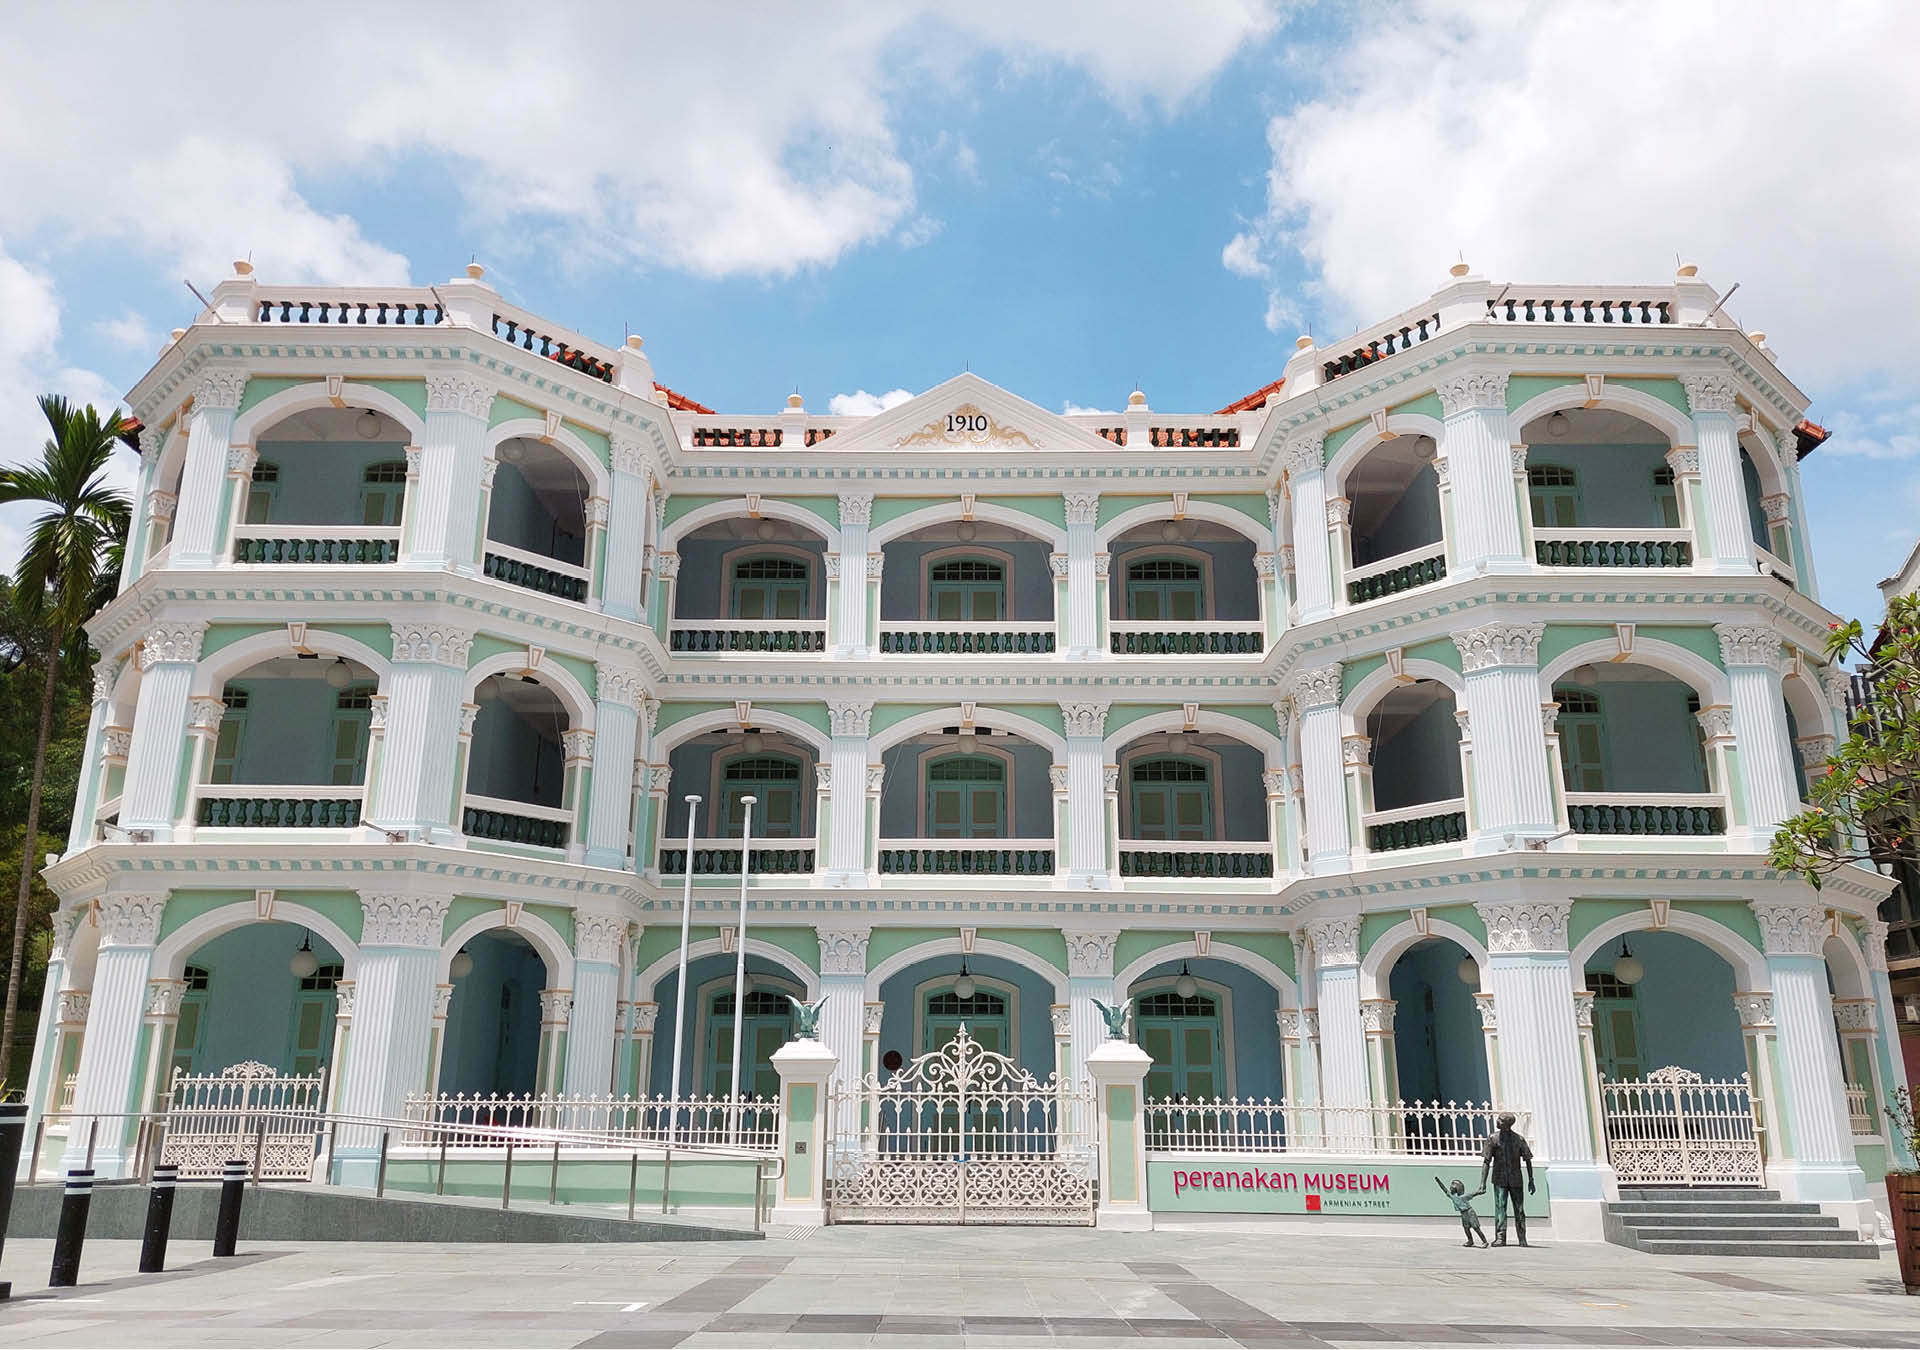 The historic white facade of the Peranakan Museum in Singapore.